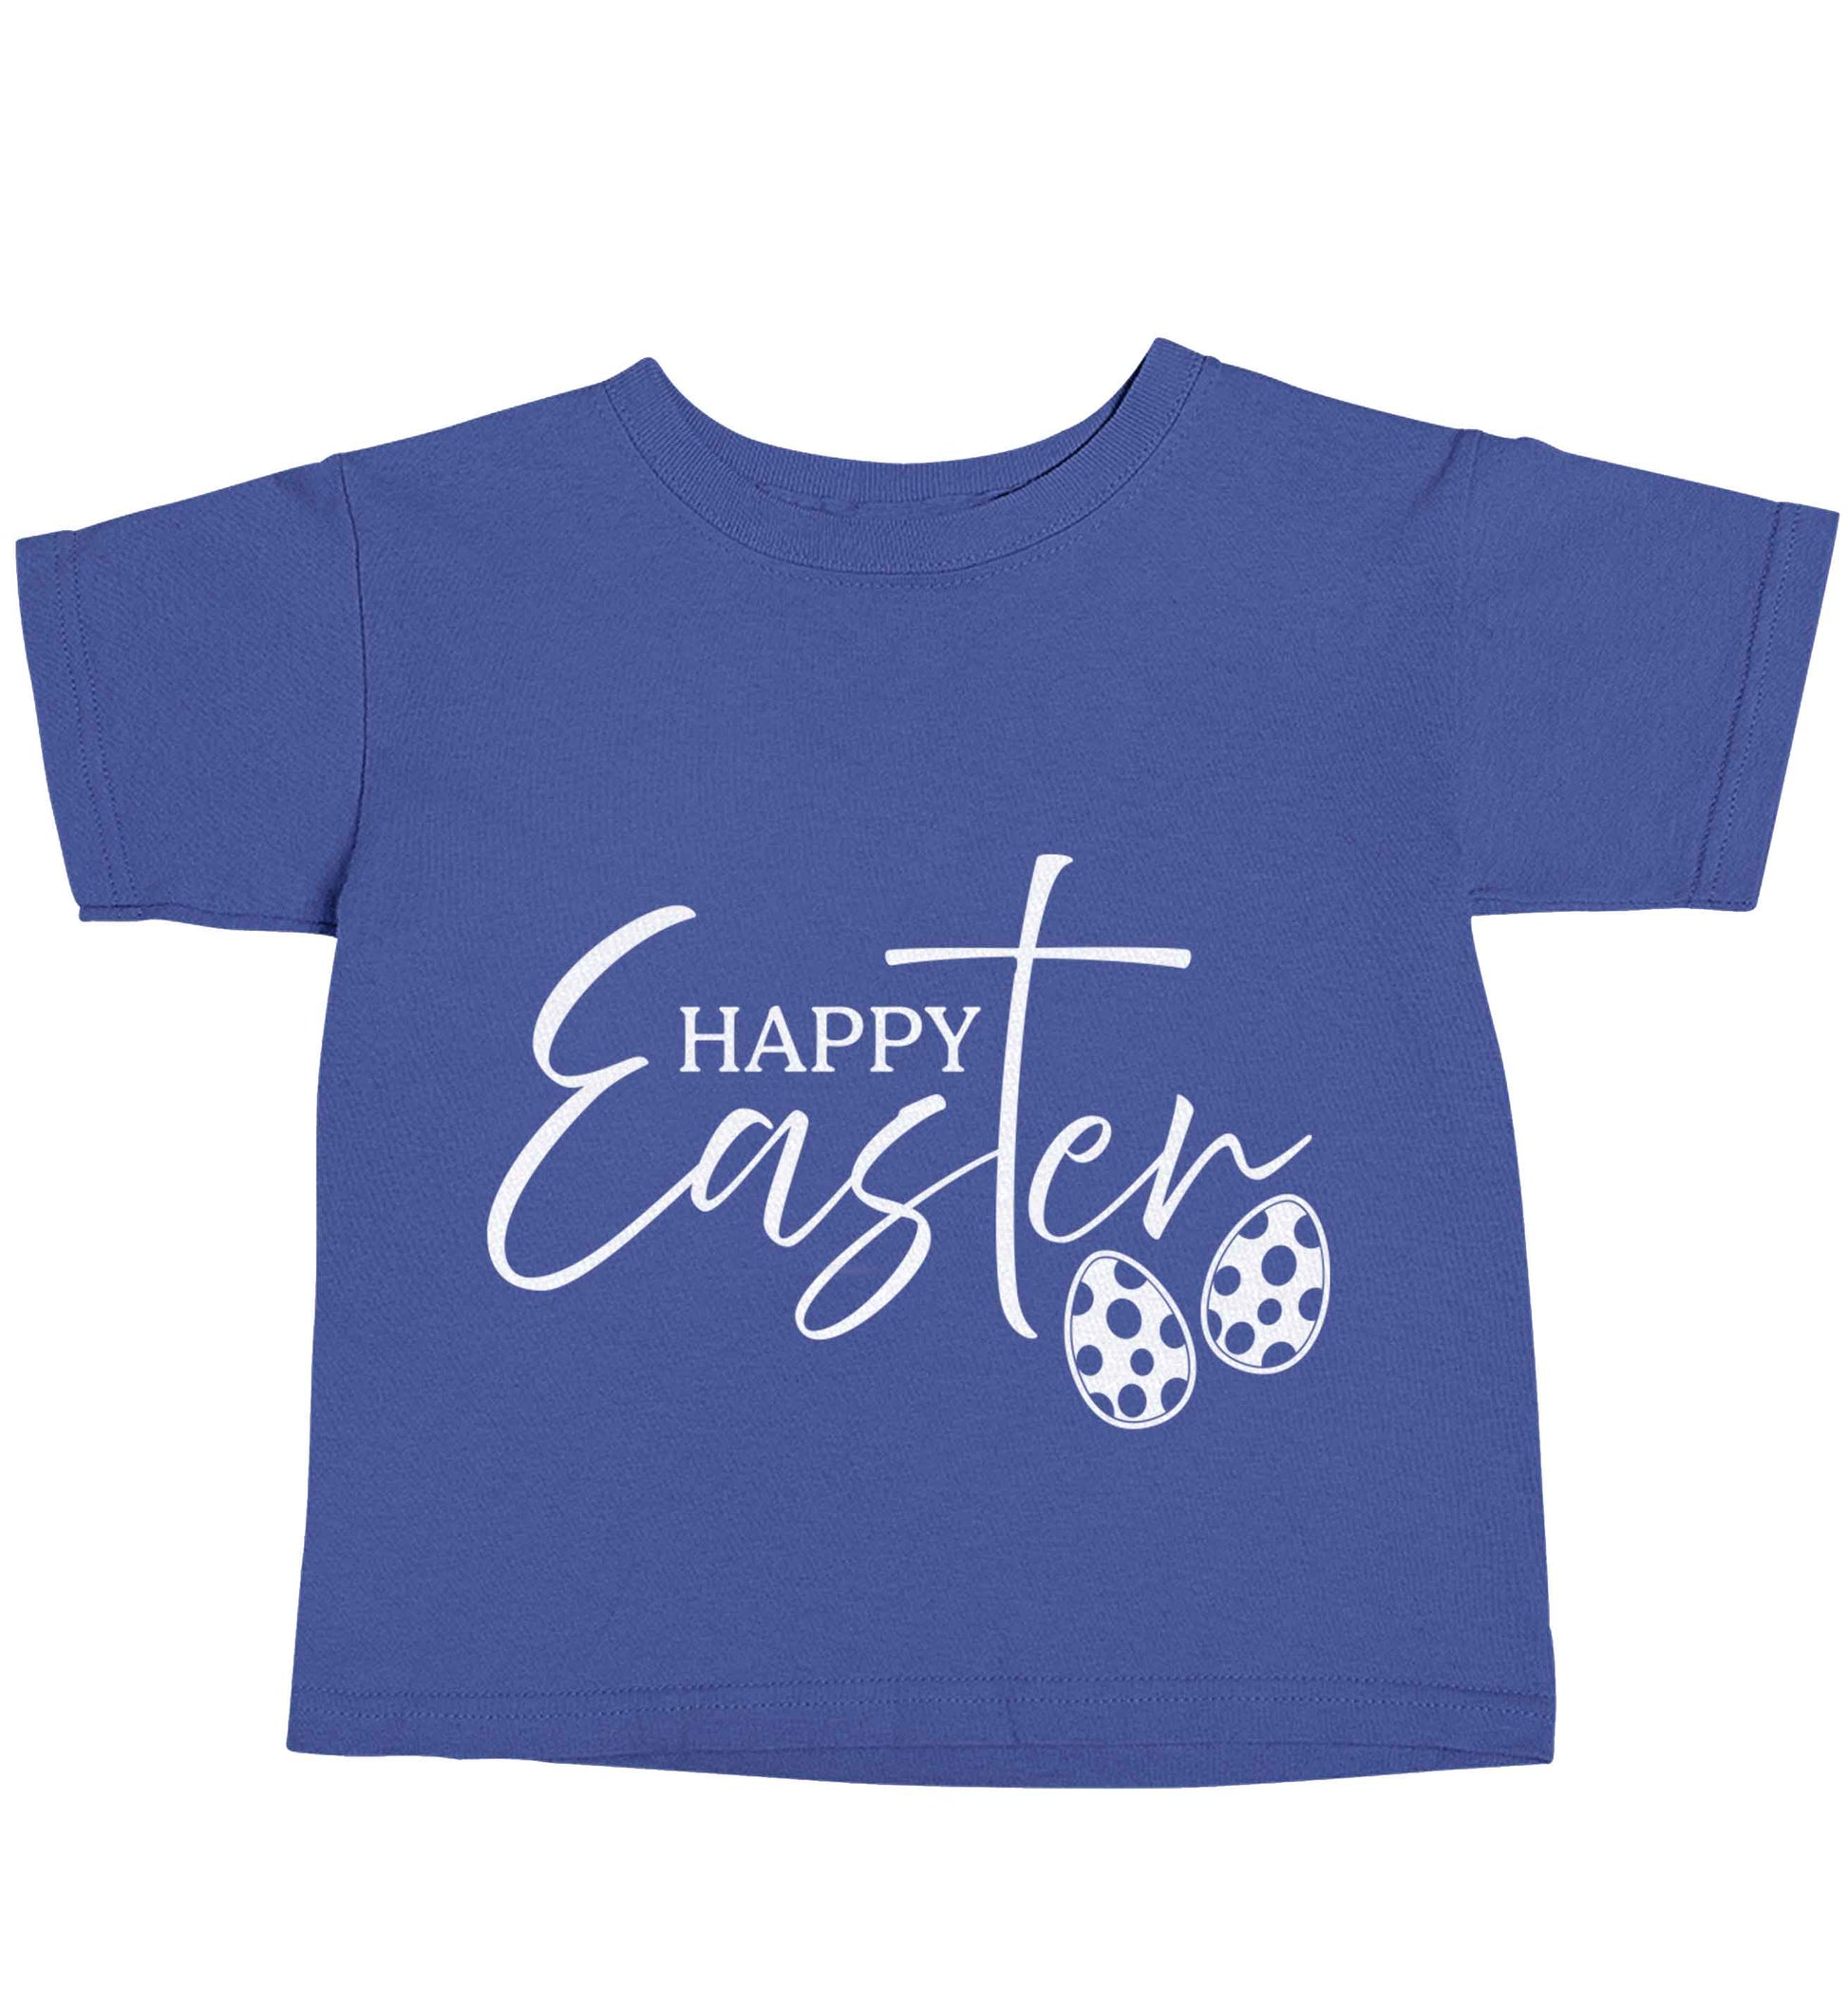 Happy Easter blue baby toddler Tshirt 2 Years